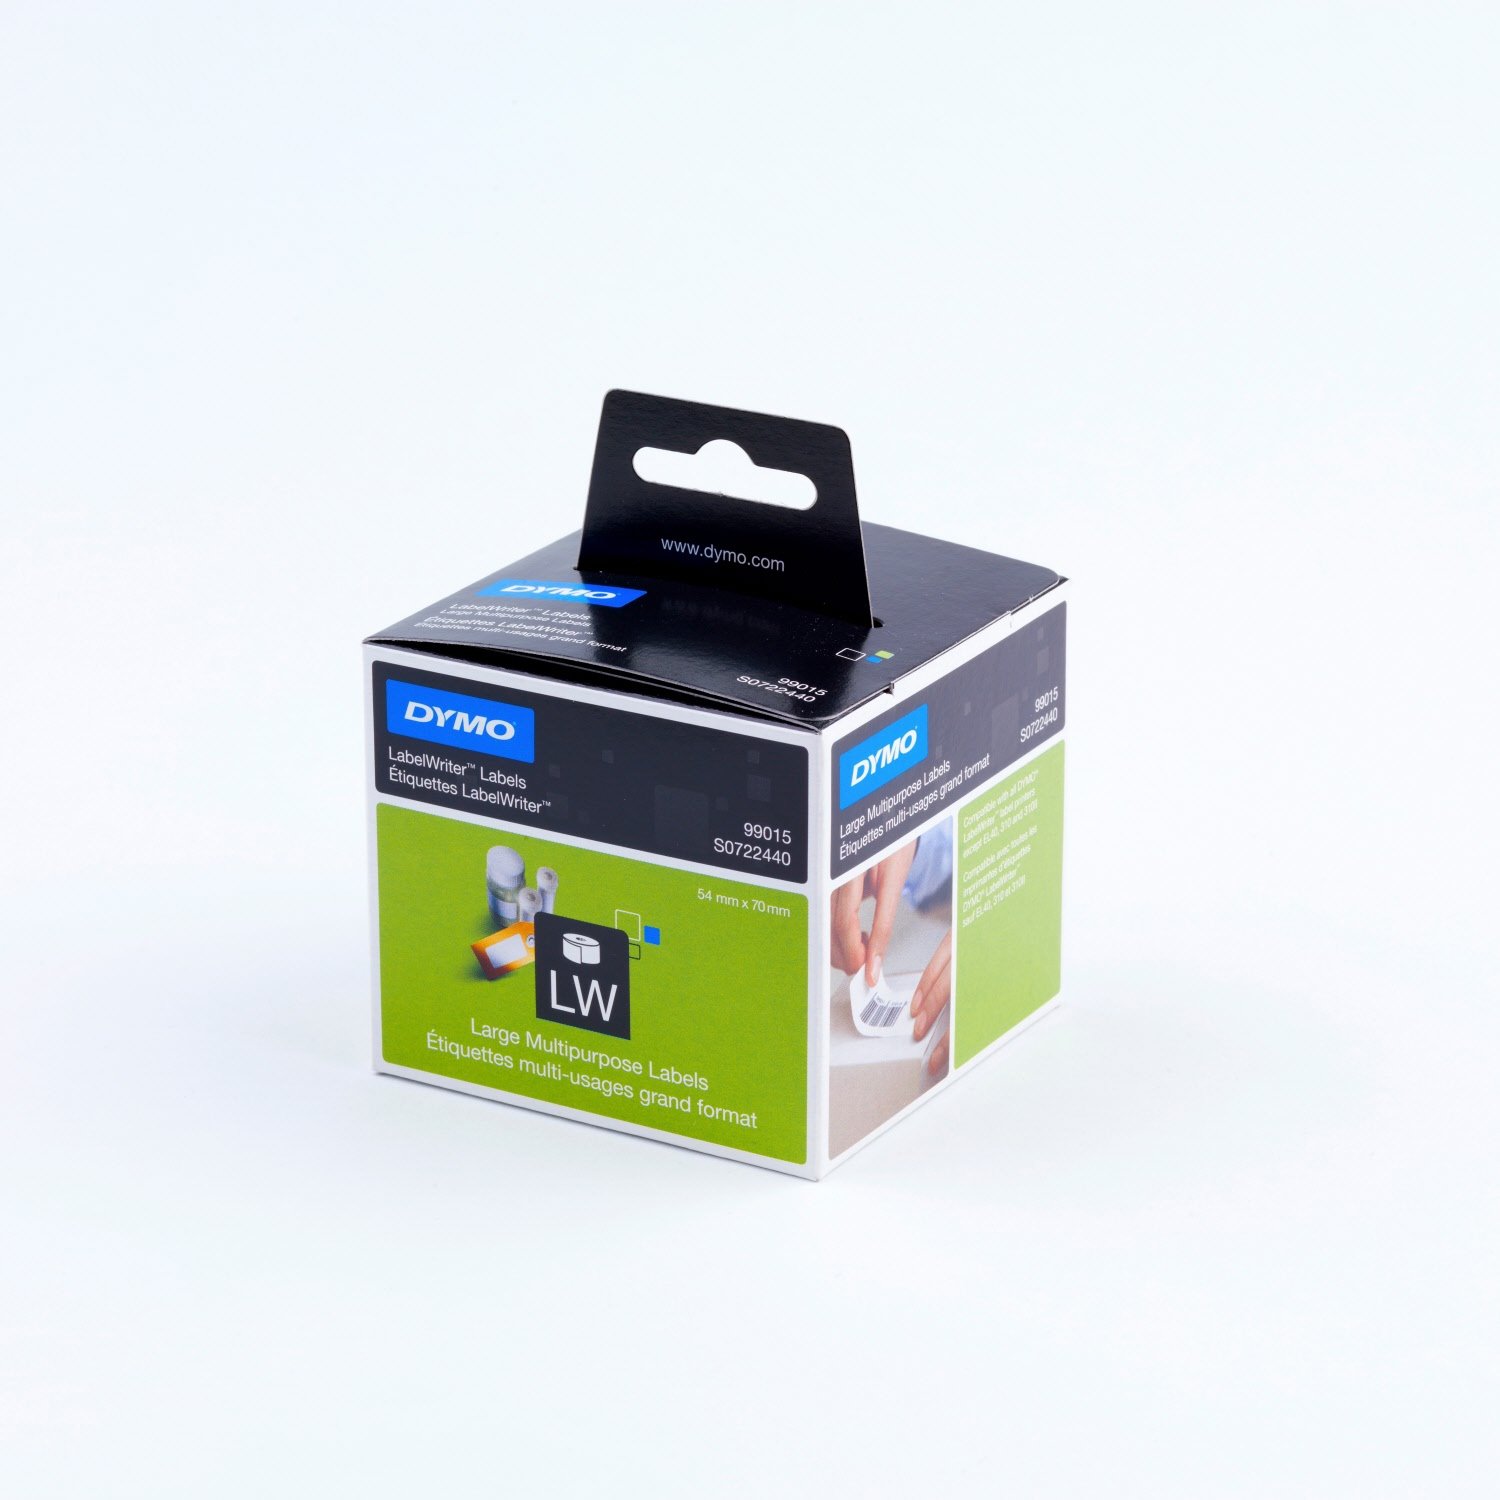 Dymo (SD99015/S0722440) Large Multi-Purposem, Paper/White 54MM X 70MM, 1 Roll/Box, 320 Labels/Roll